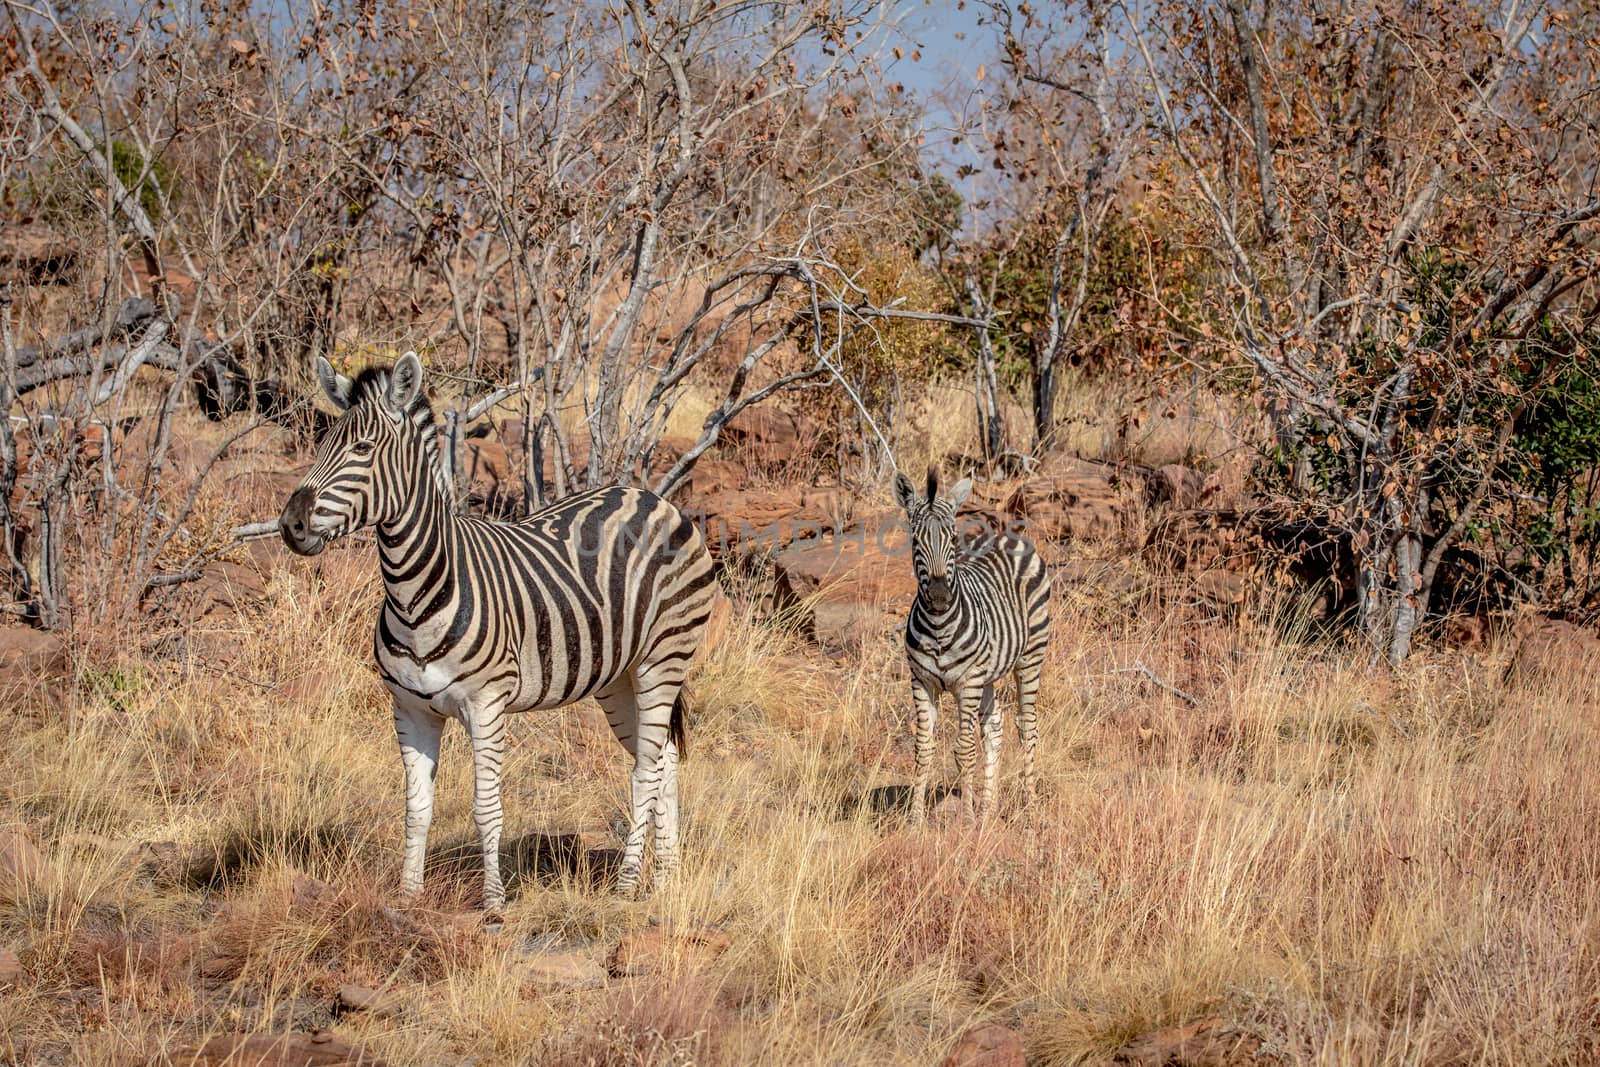 Mother Zebra with baby Zebra in the Welgevonden game reserve, South Africa.